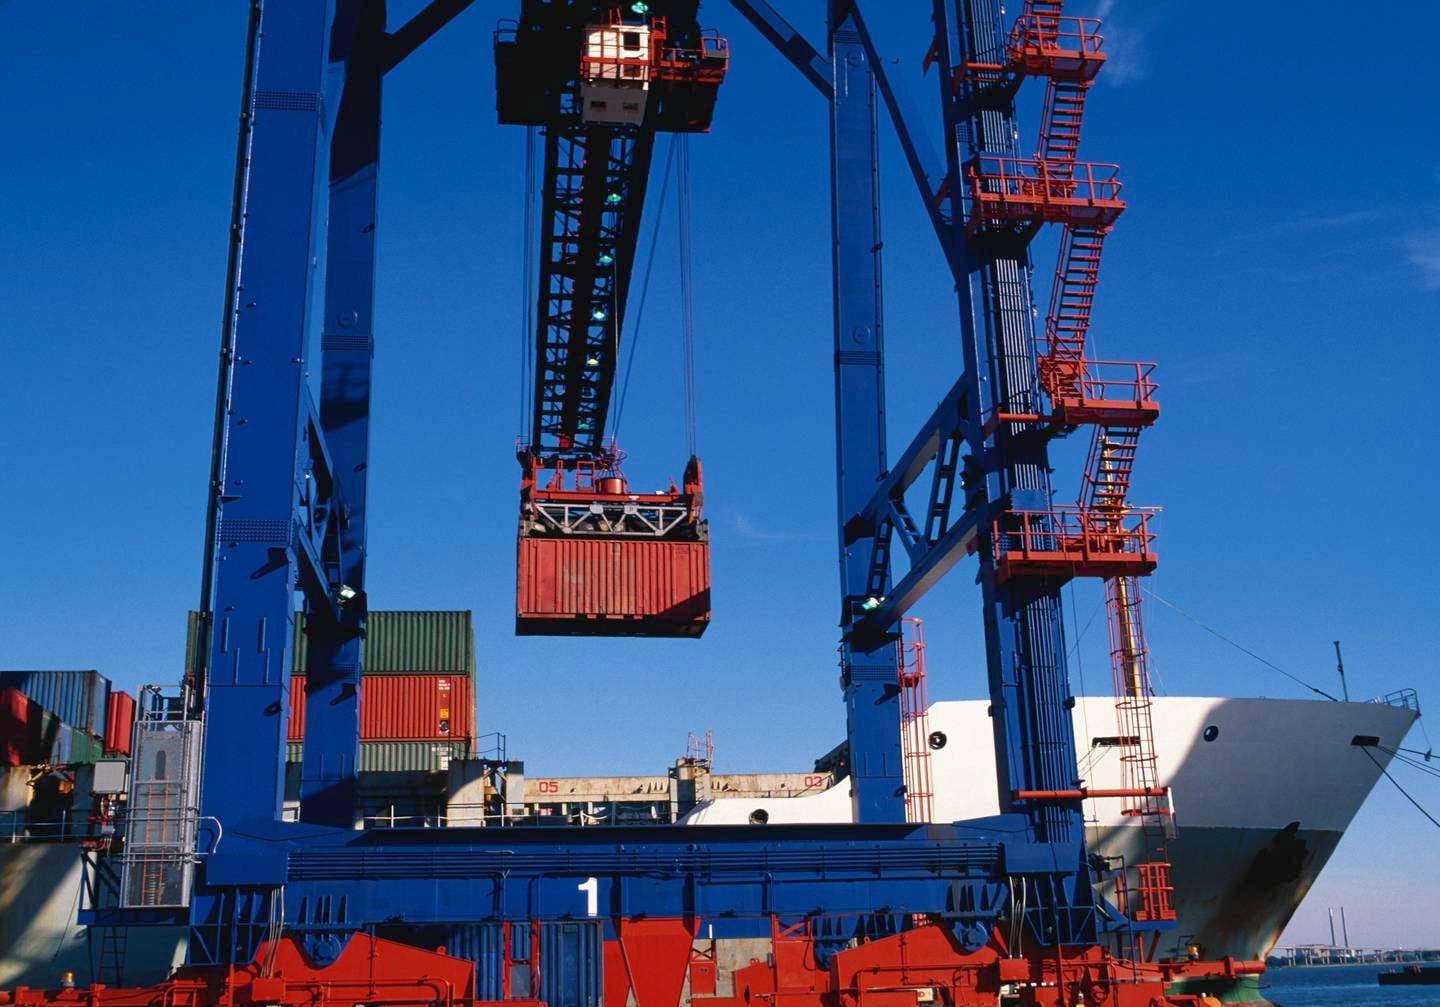 A blue crane loads a red container onto a cargo ship at the Port of Baltimore.